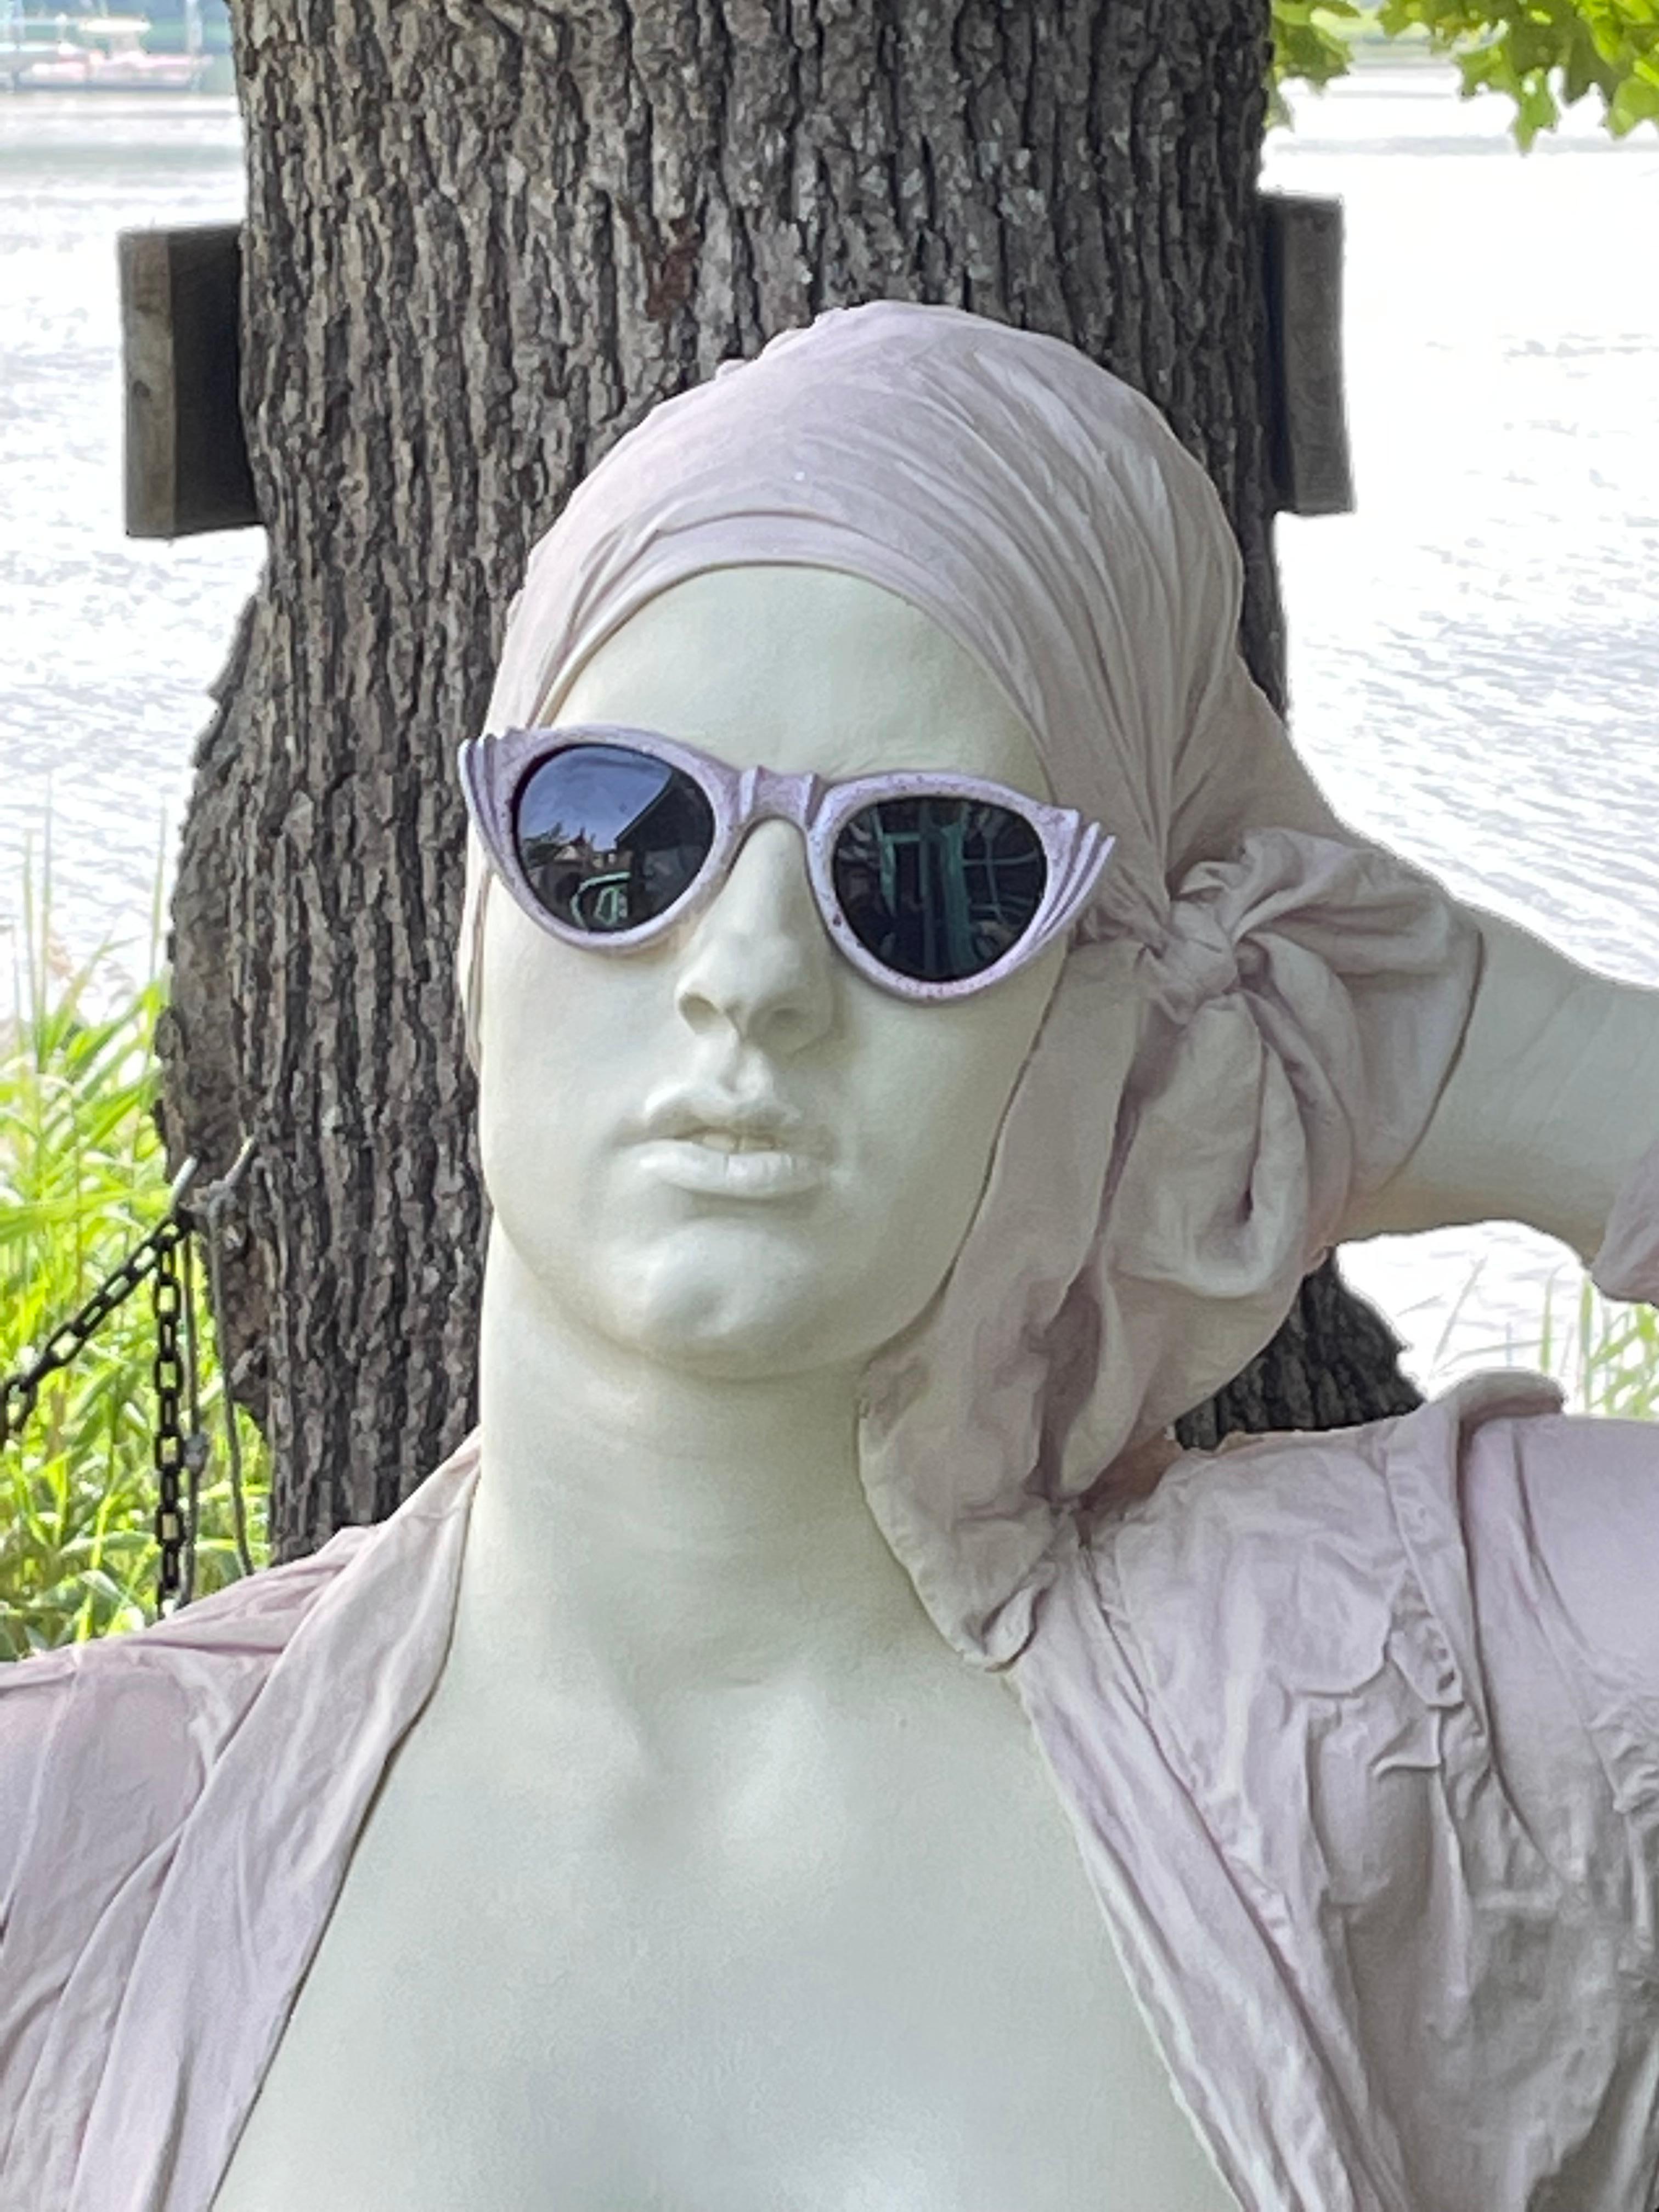 Wonderful and whimsical sculpture made by Marc Sijan .Sijan’s work is found all over the world. His art form is called Hyper Realism. This piece is a lifelike ceramic sculpture of a woman in a bathing suit and sunglasses. Hang her on a wall or give